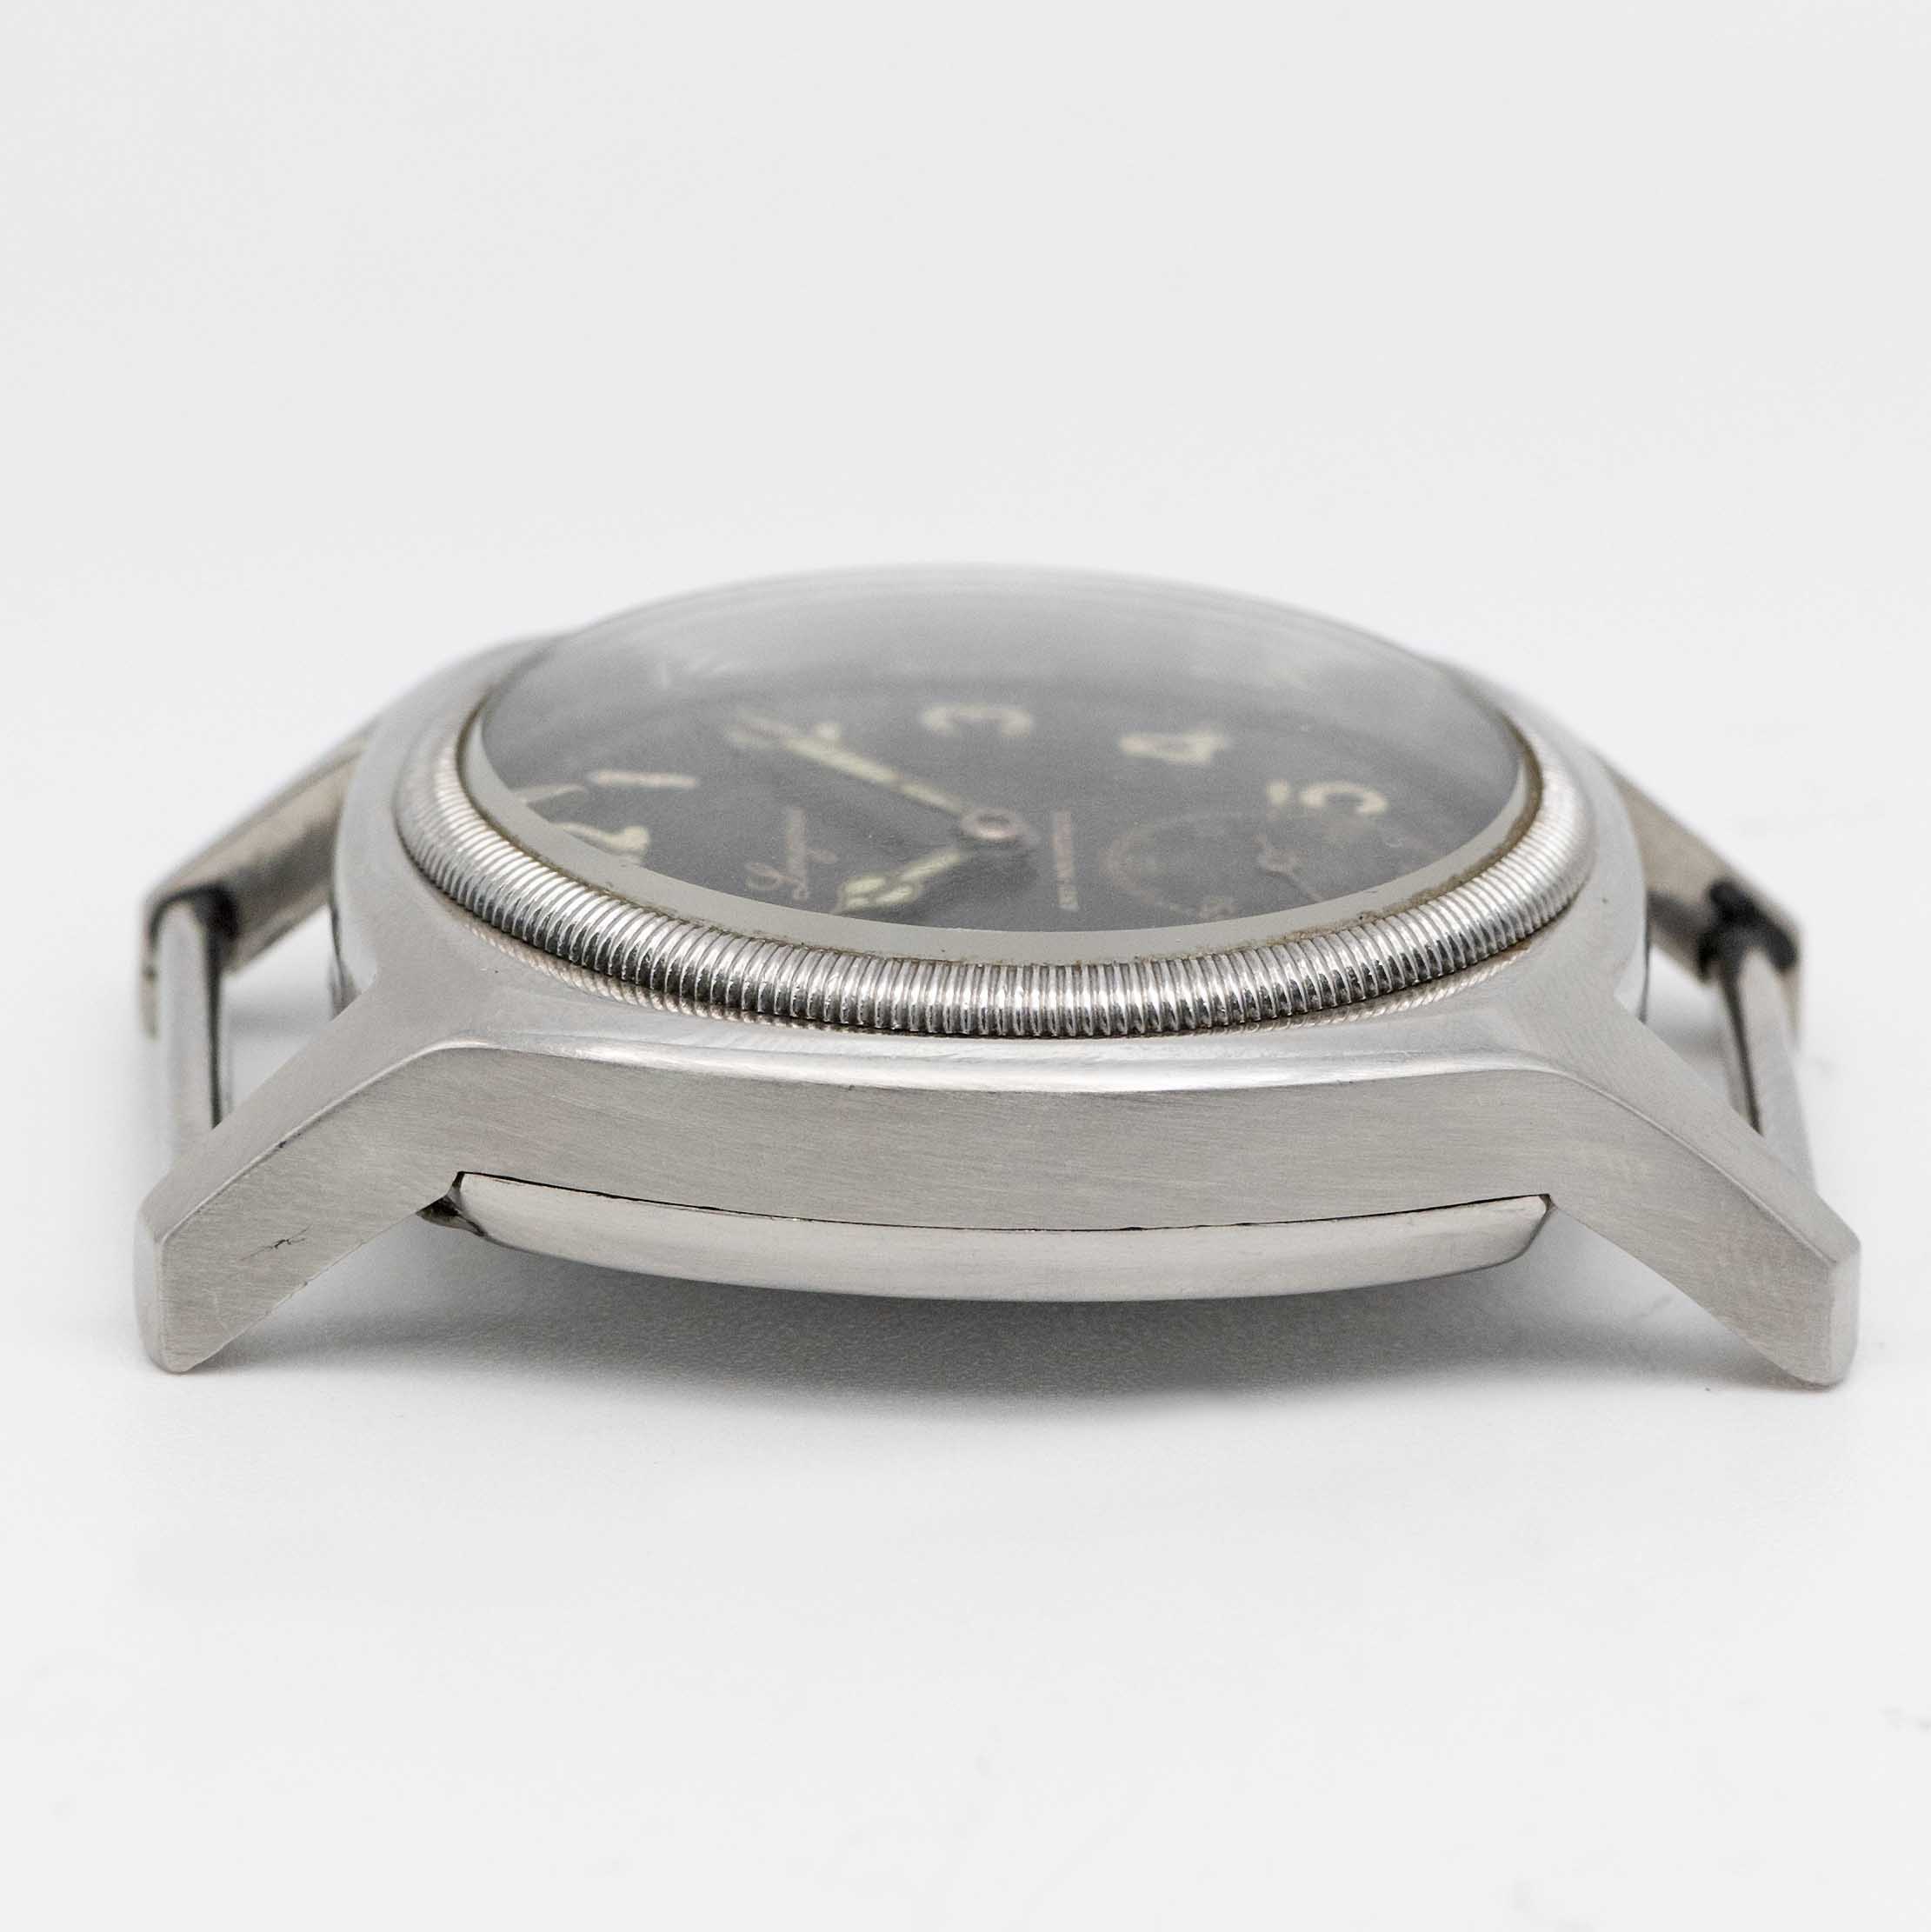 A GENTLEMAN'S STAINLESS STEEL CZECH MILITARY AIR FORCE LONGINES PILOTS WRIST WATCH CIRCA 1947 - Image 9 of 9